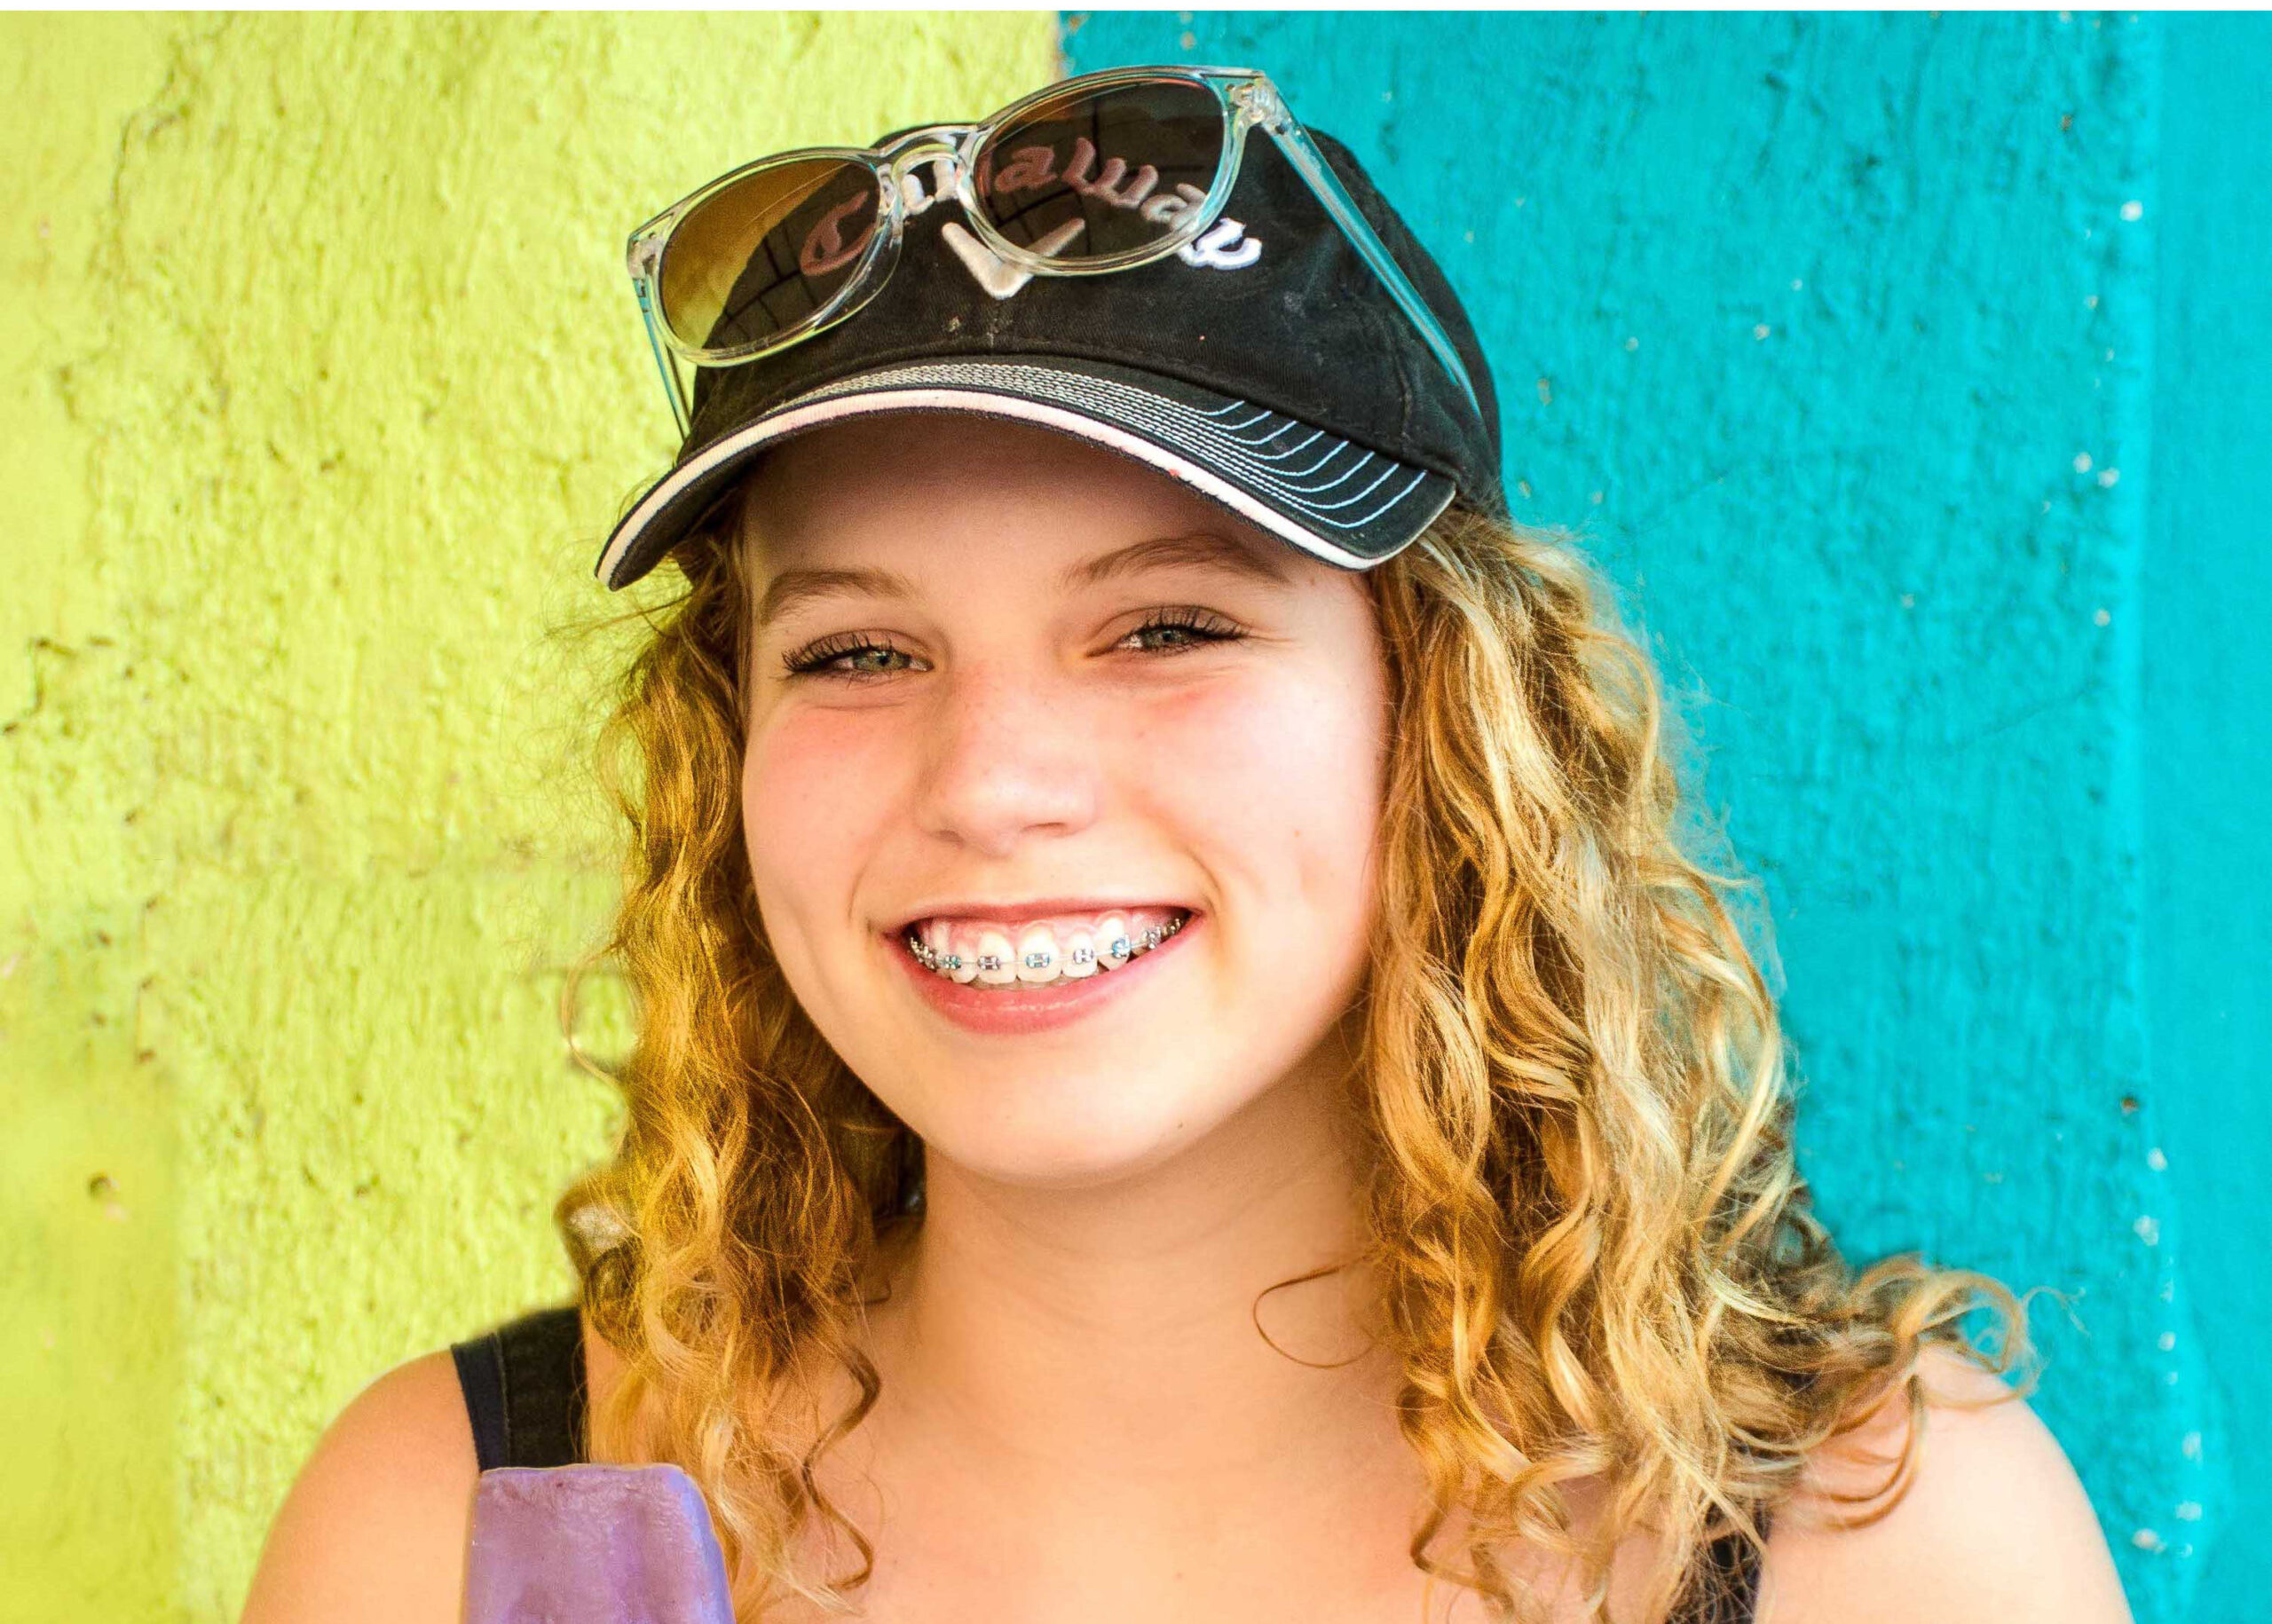 Teen in hat shows off her braces